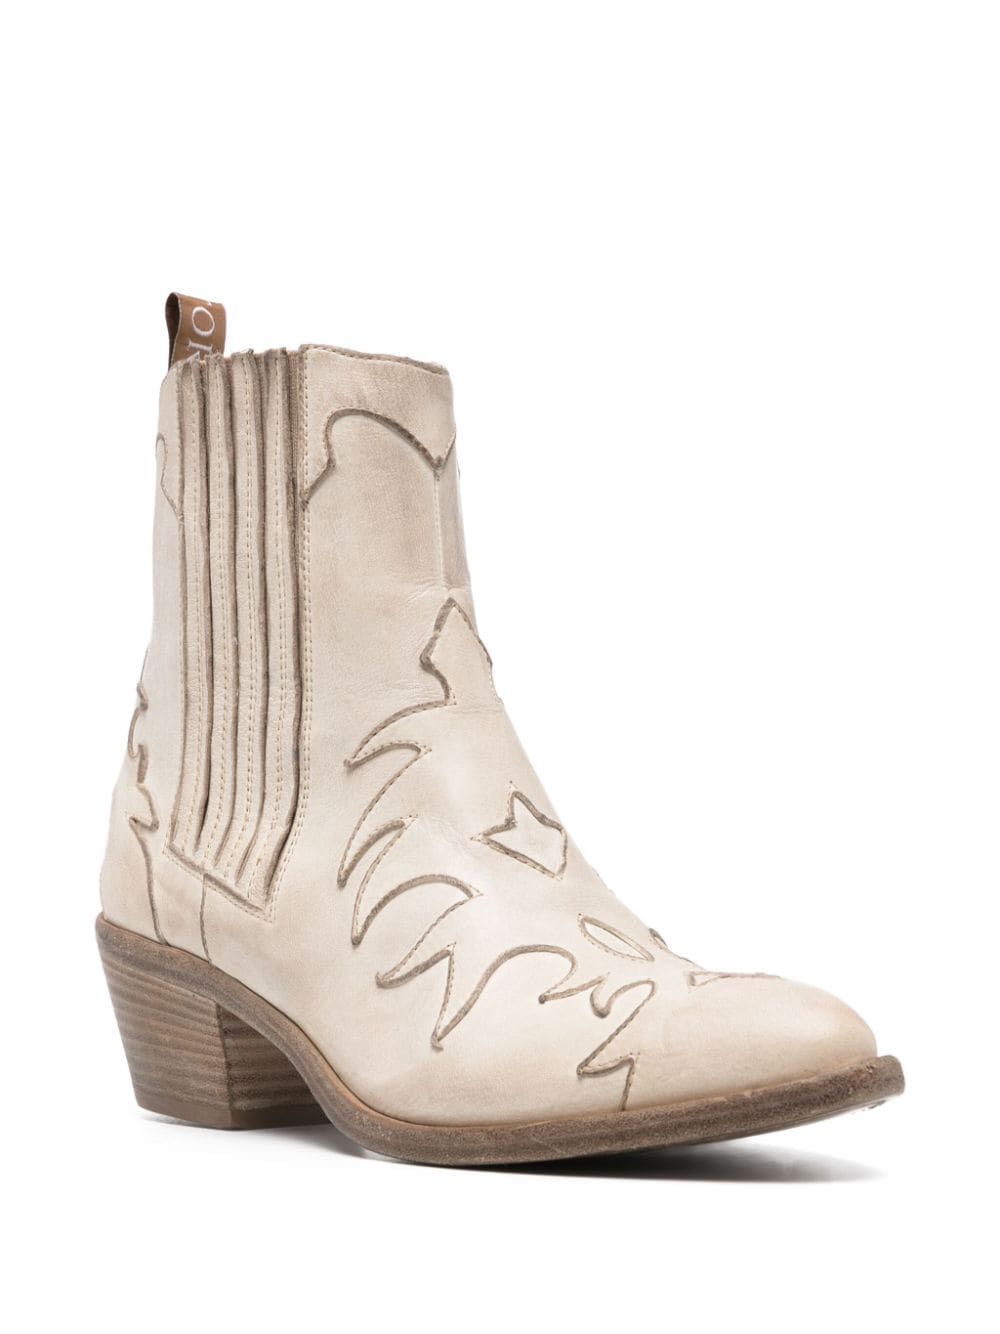 Sartore 65mm leather boots - Beige